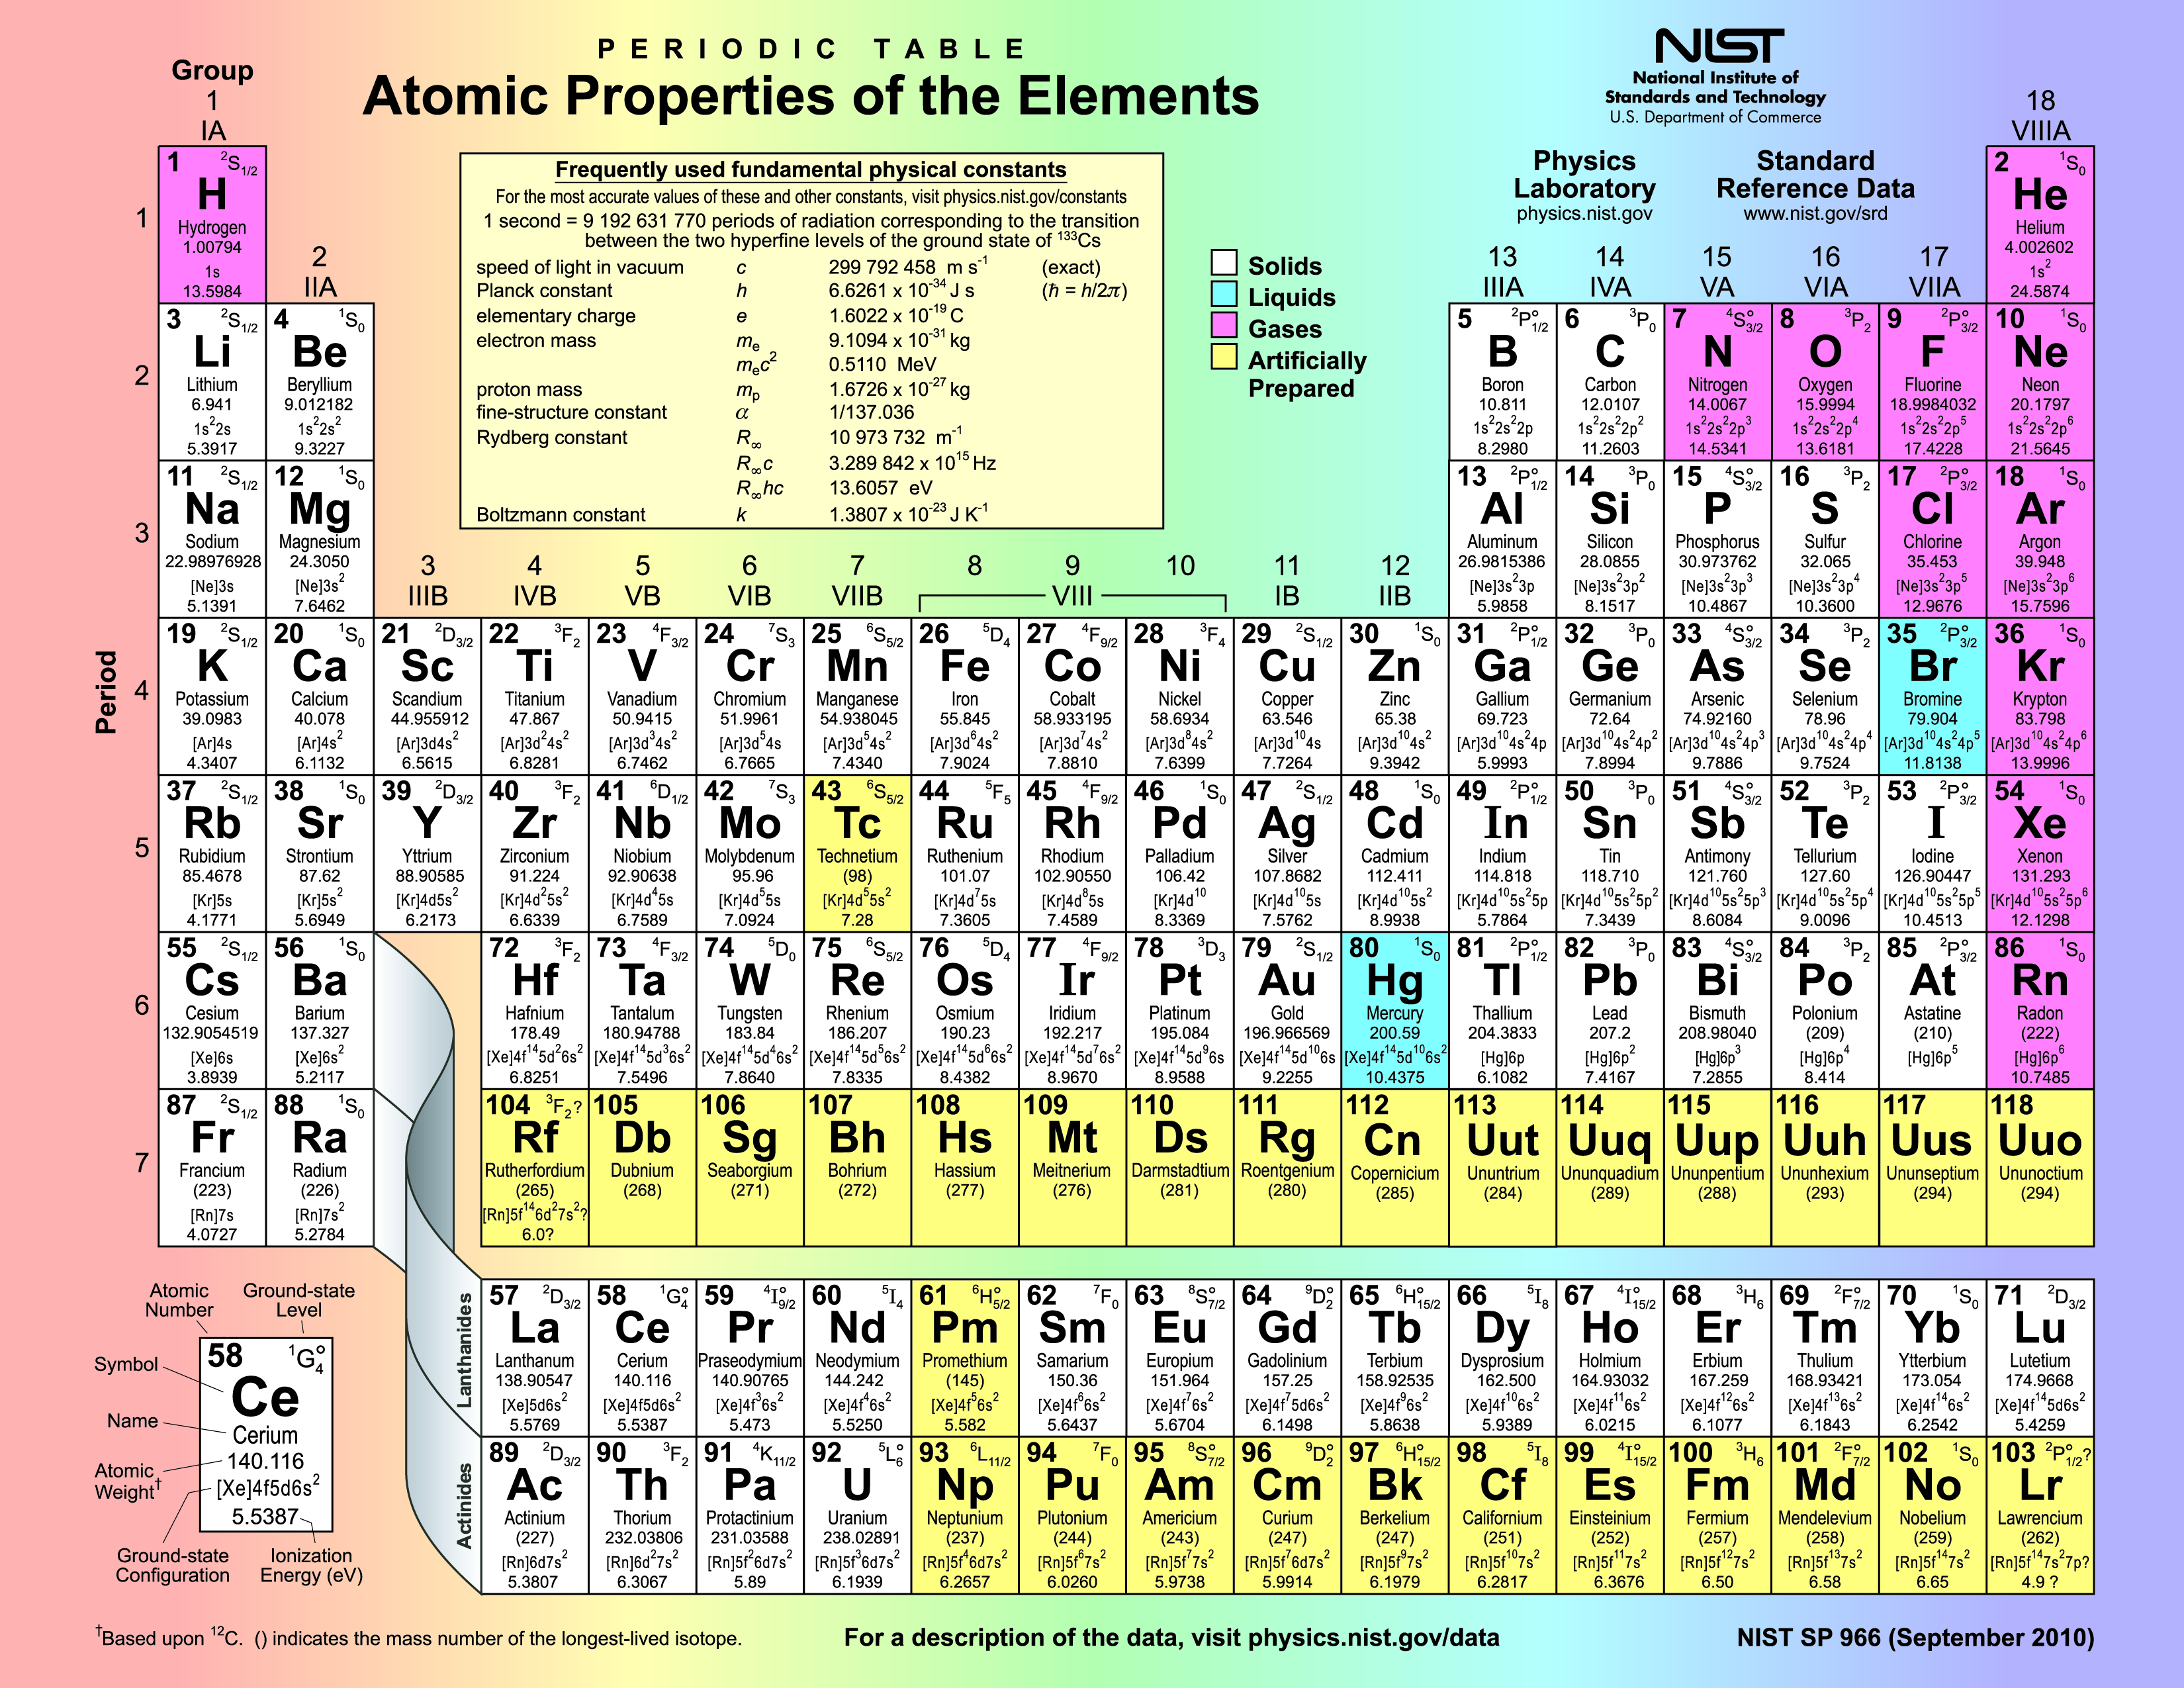 The periodic table of the elements.